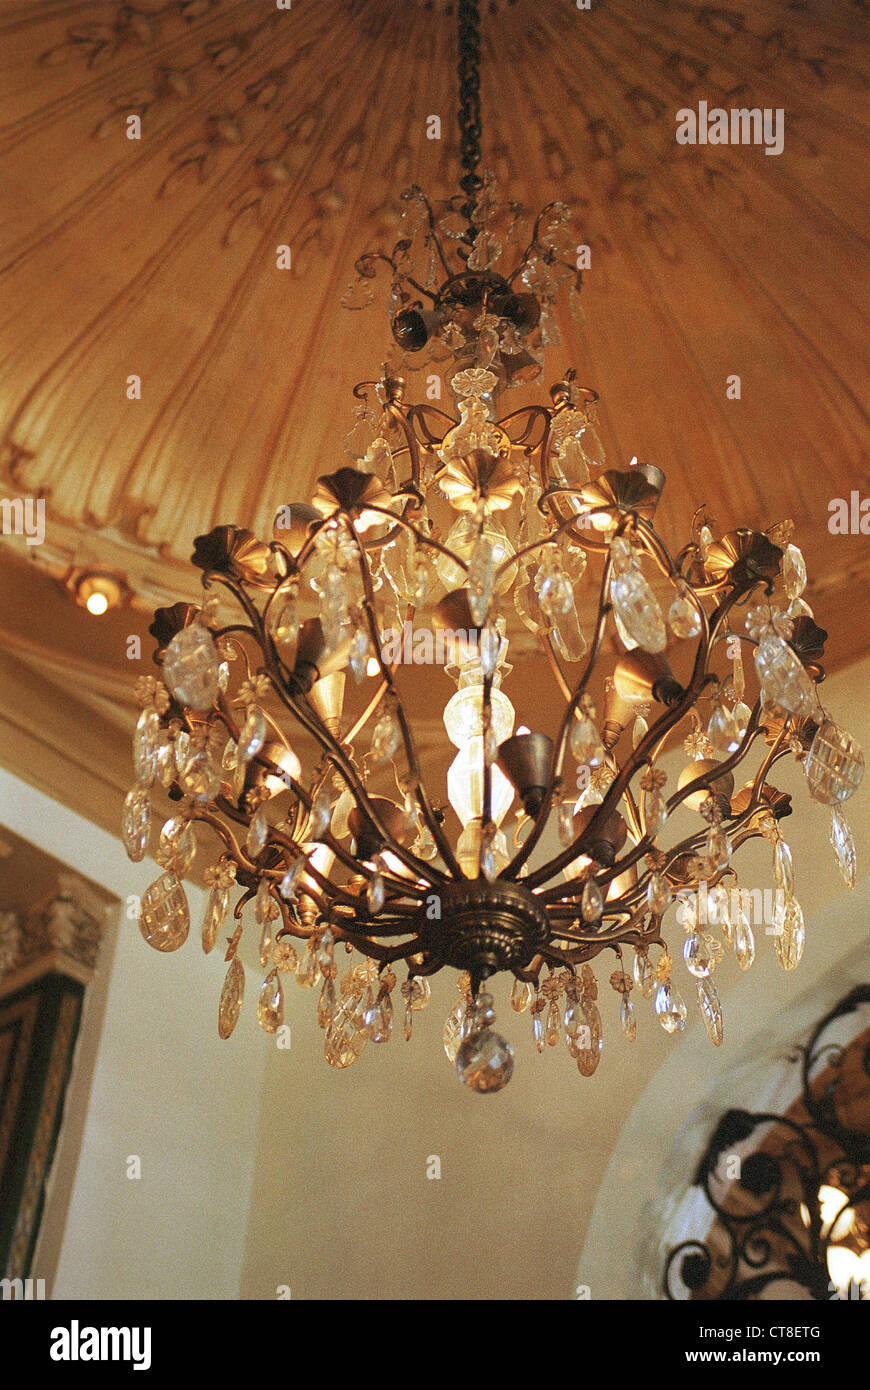 Chandelier at the Hotel Inglaterra Stock Photo